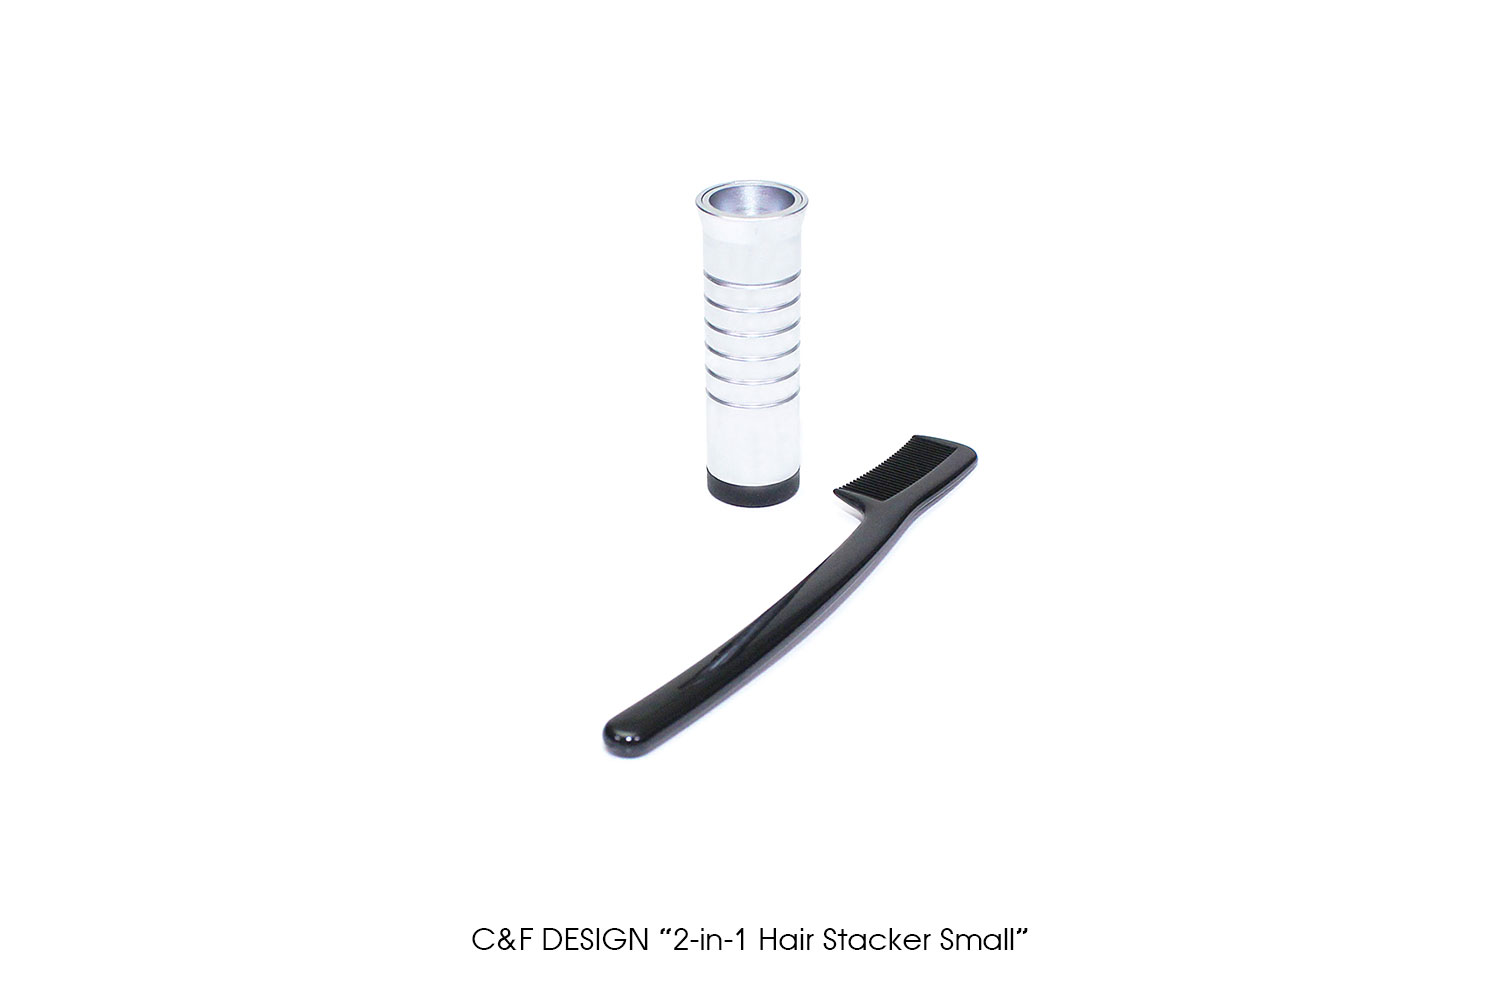 C&F DESIGN "2-in-1 Hair Stacker Small"